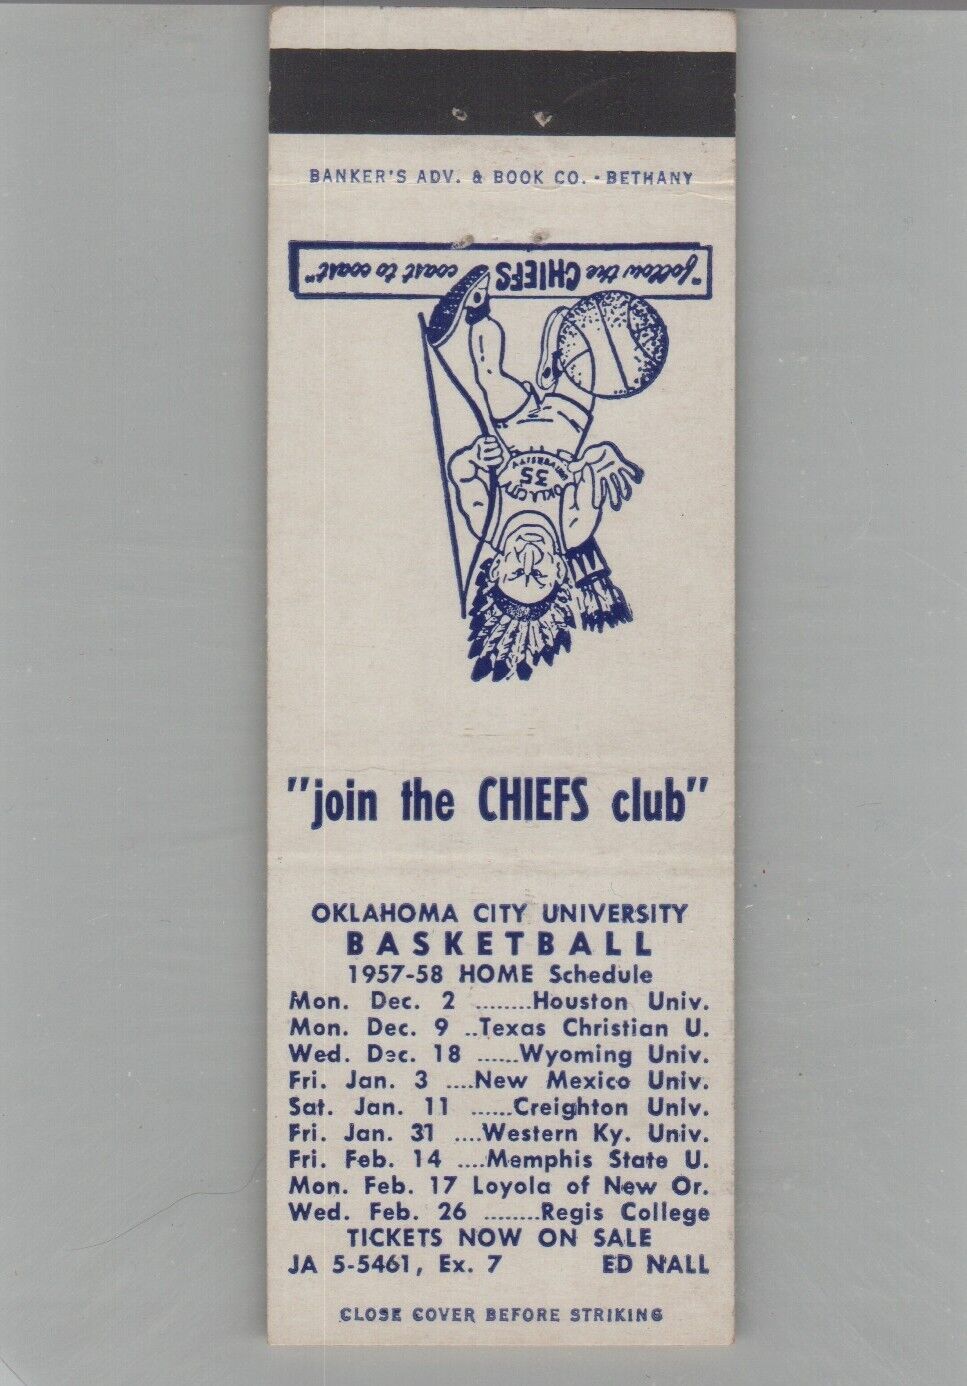 Matchbook Cover 1957-58 Oklahoma City University Basketball Schedule